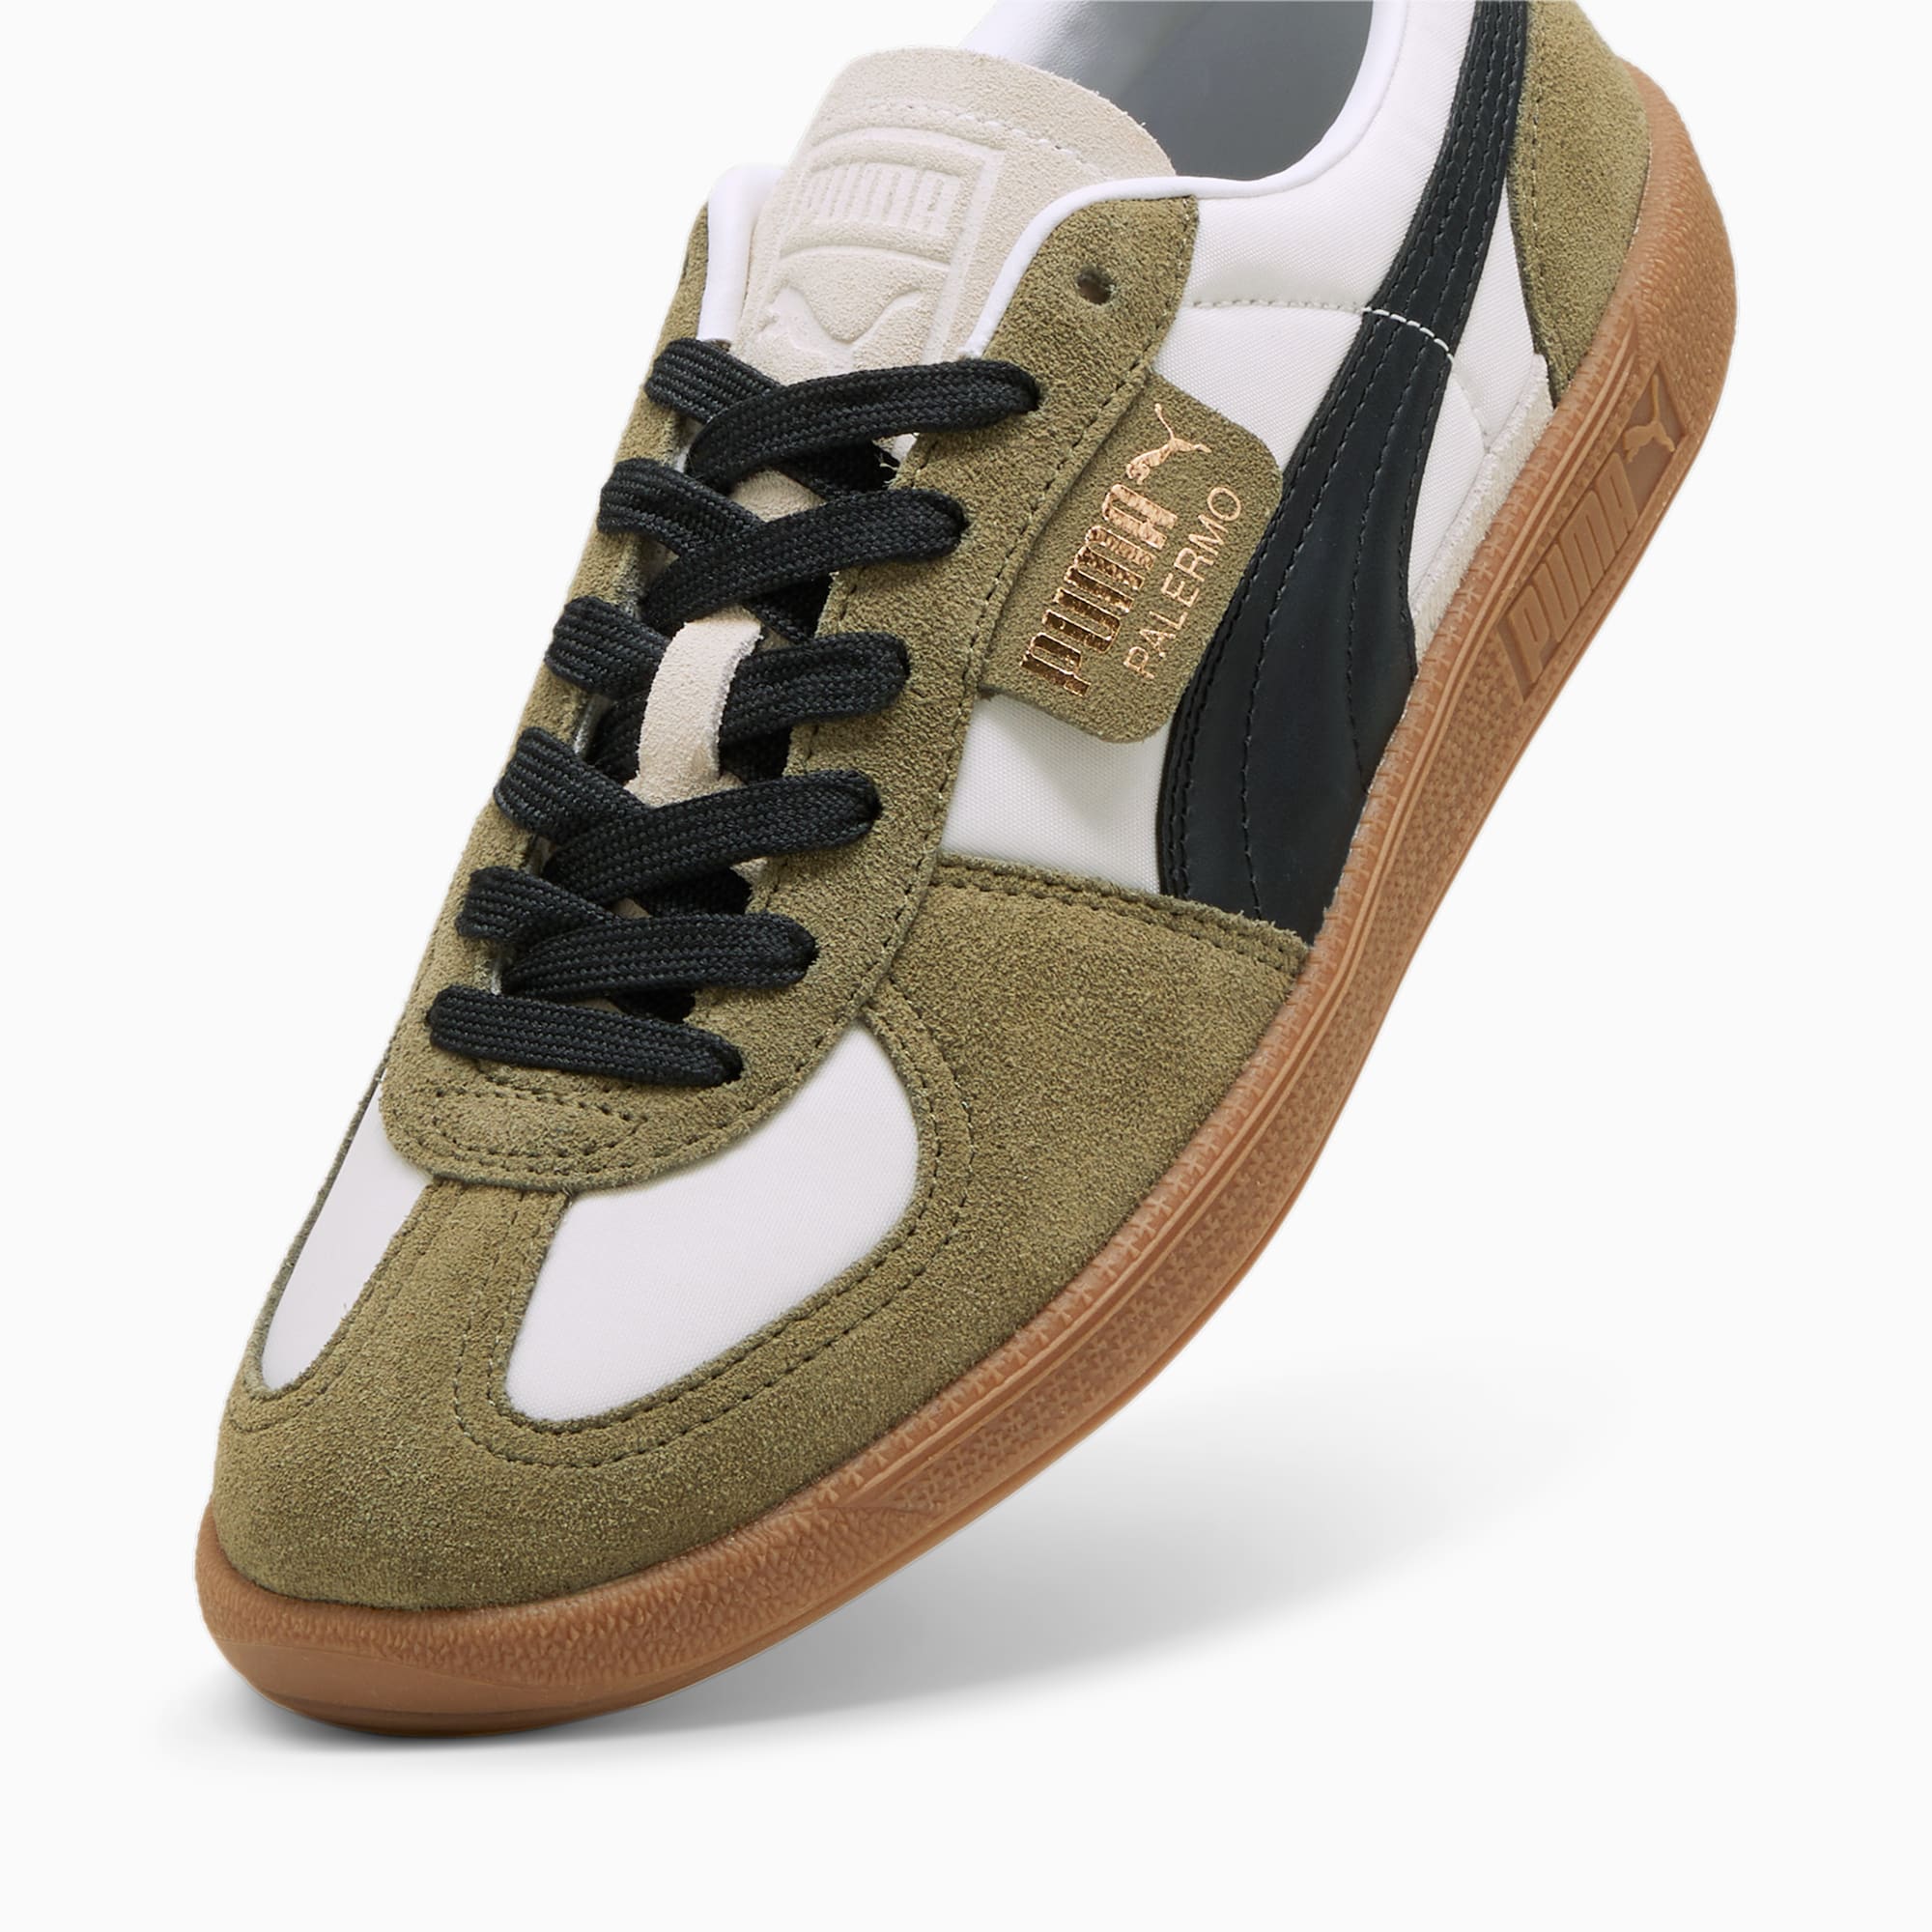 Women's PUMA Palermo OG Sneakers, Sugared Almond/Black/Olive, Size 35,5, Shoes